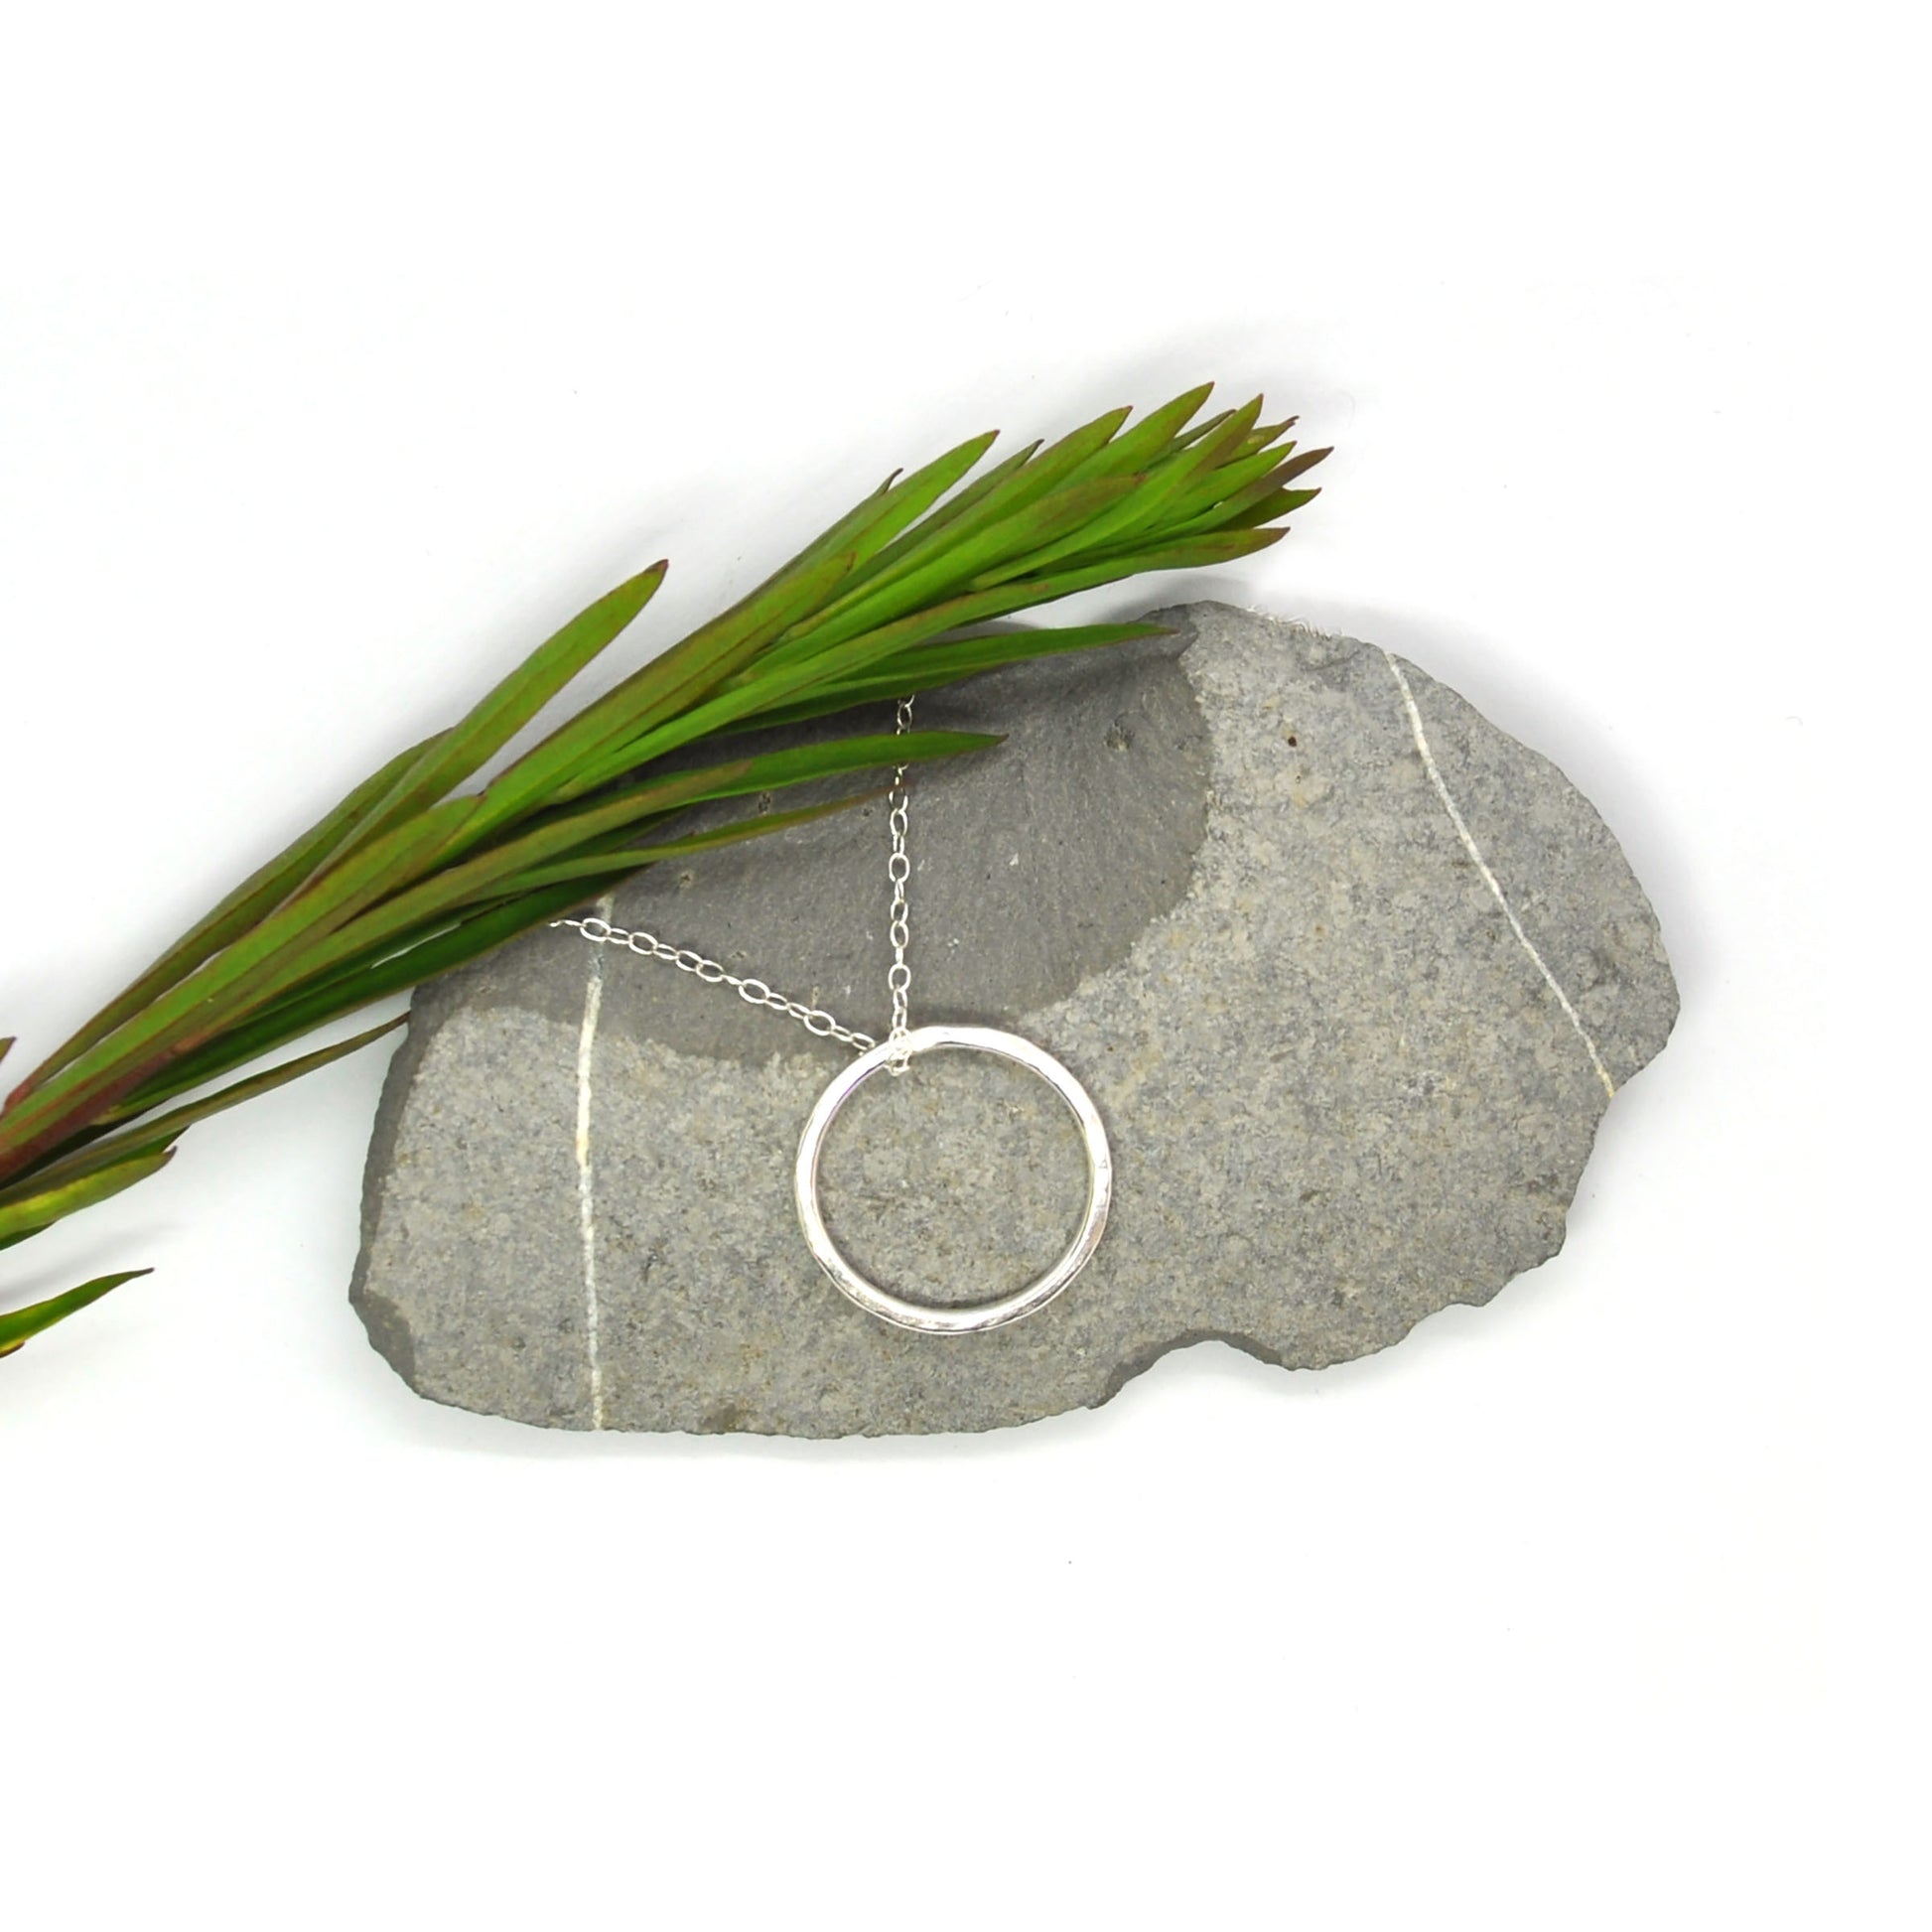 Silver hammered open circle pendant on silver chain - large on pebble with greenery